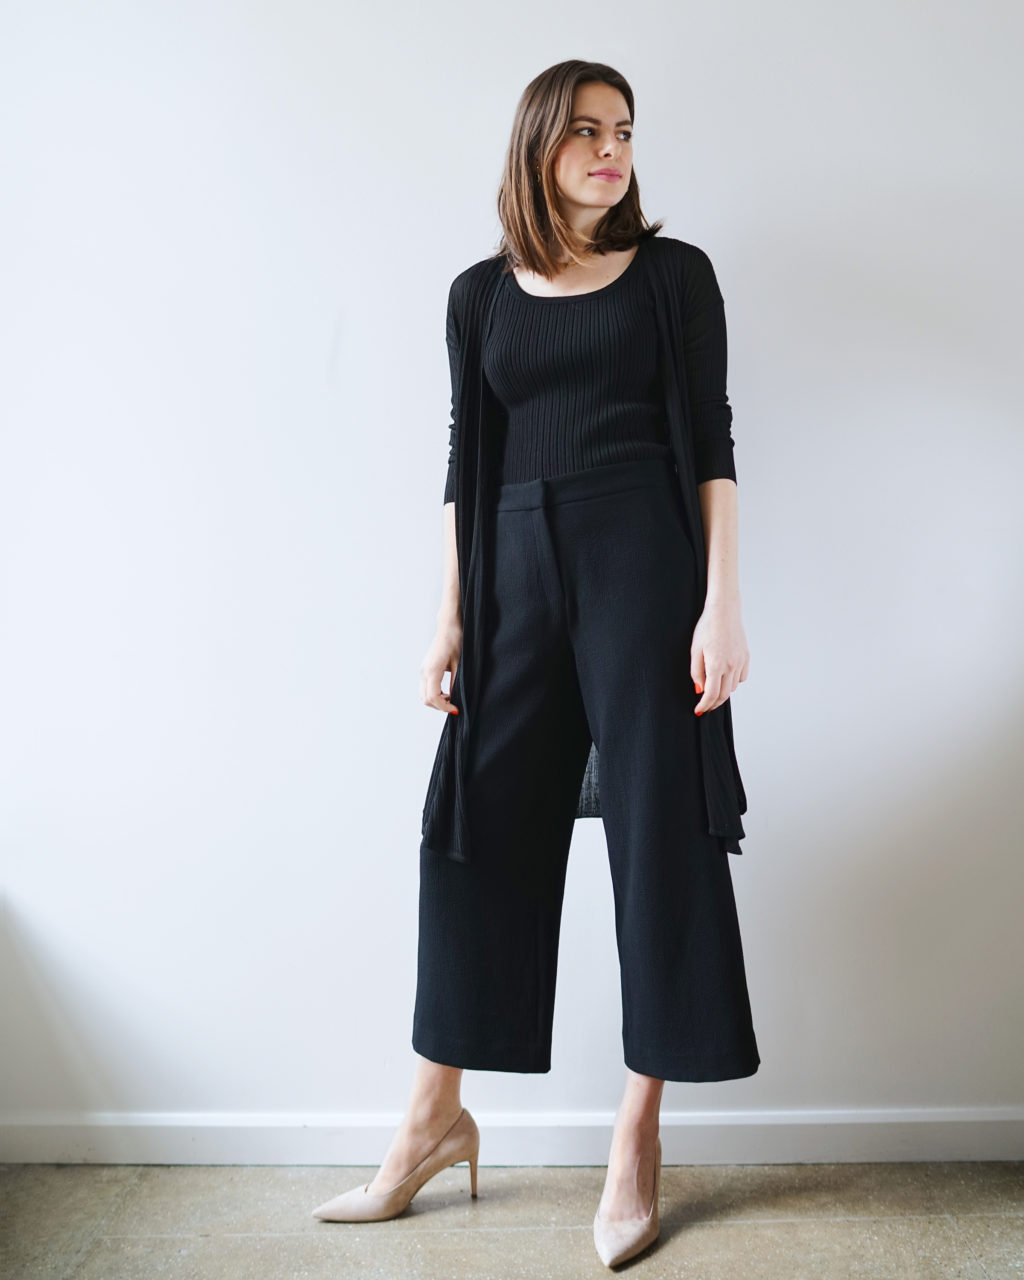 culotte outfit ideas